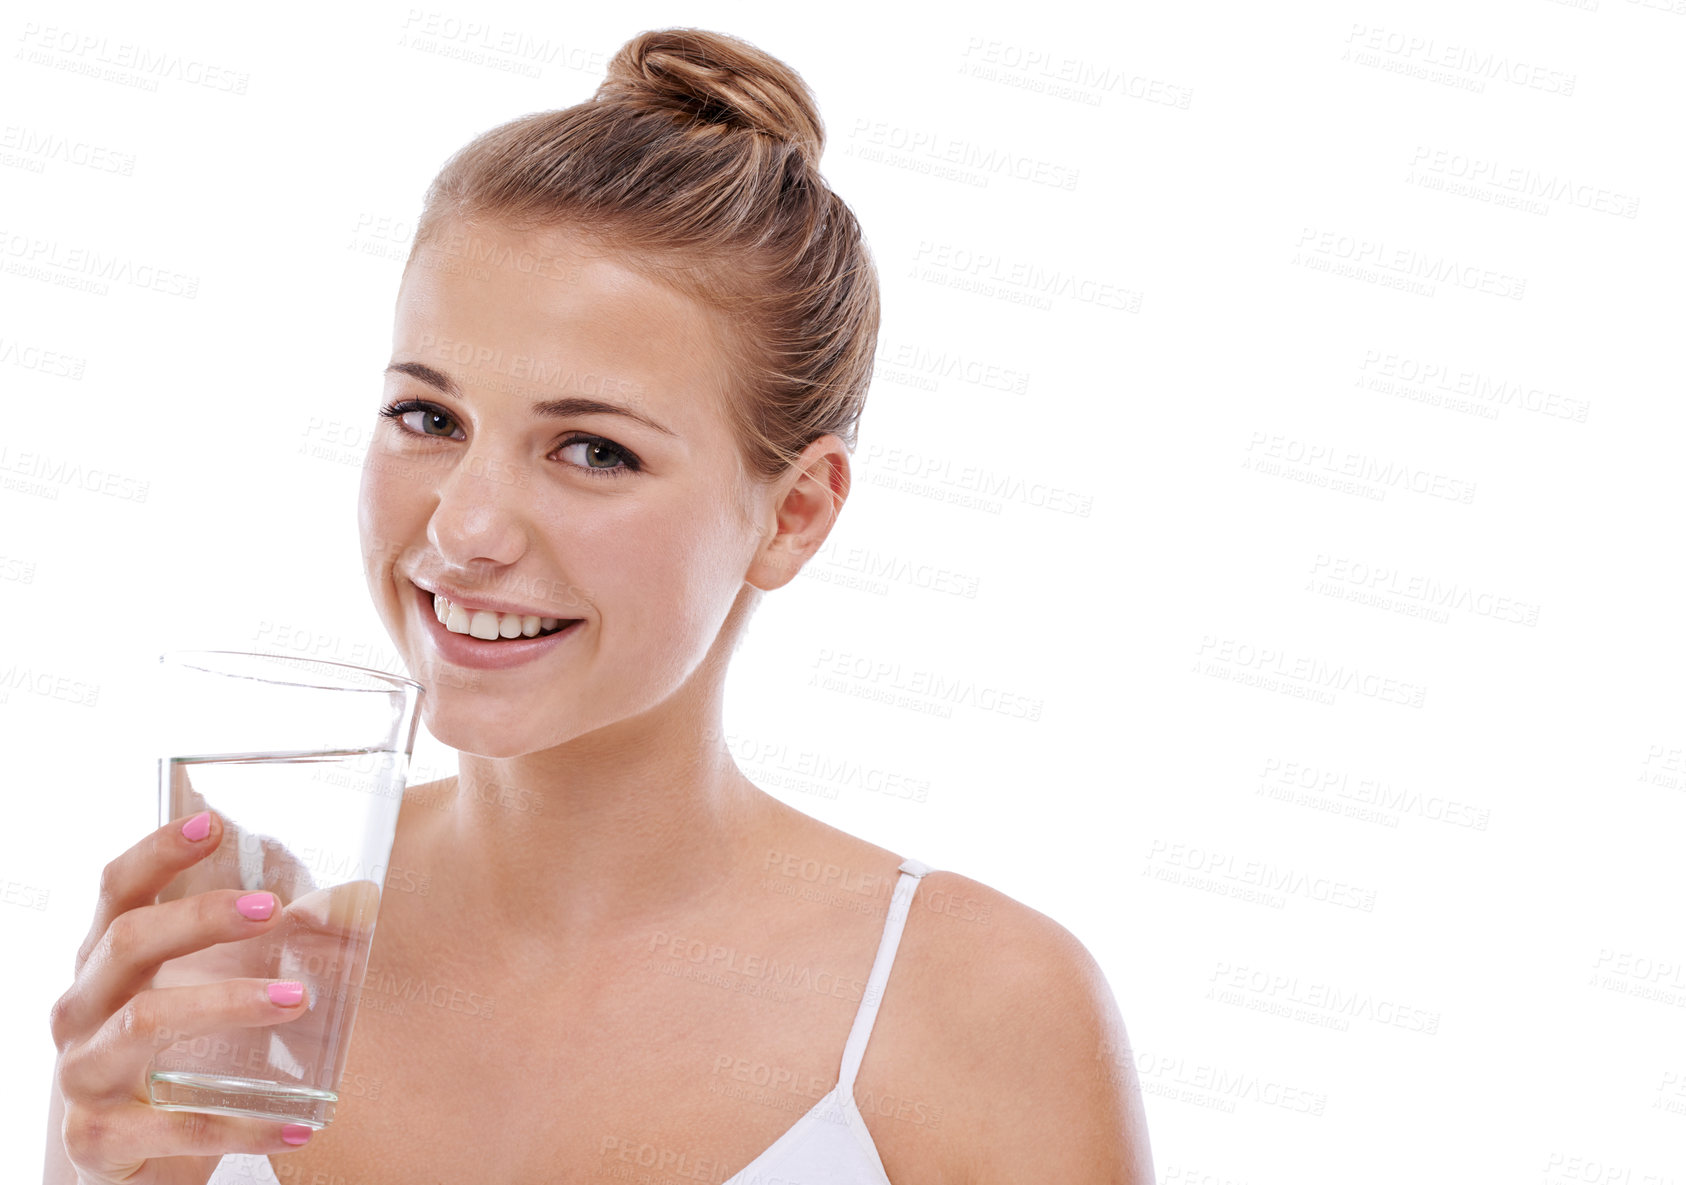 Buy stock photo A cute young girl with perfect skin drinking water while isolated on white